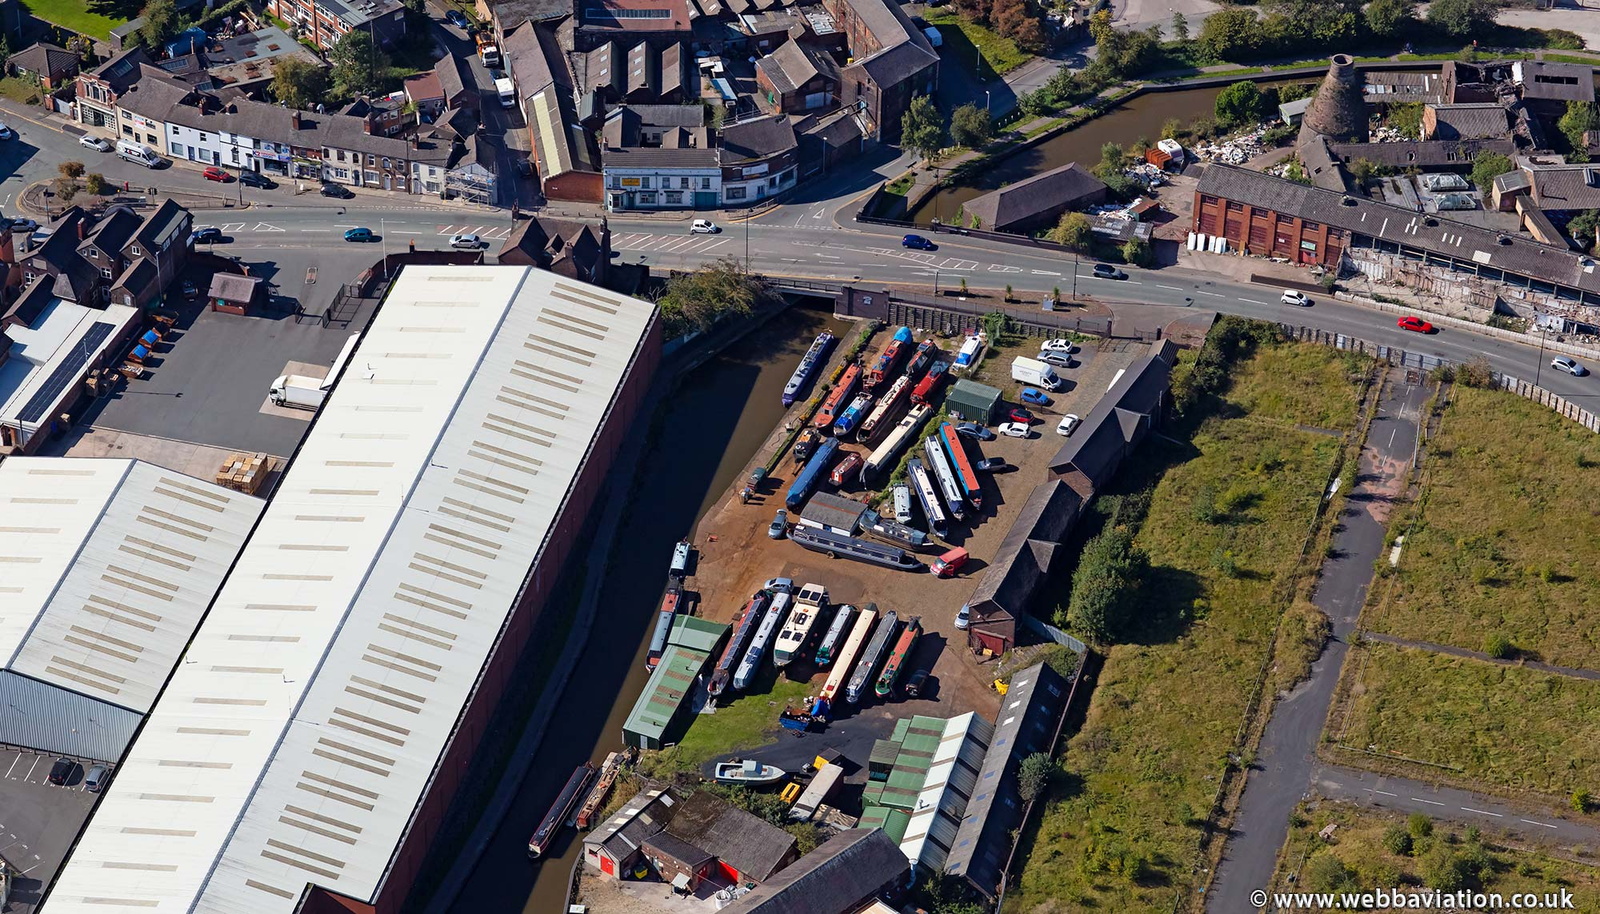 Stoke On Trent Boat Building Company, Longport, Stoke-On-Trent, from the air 